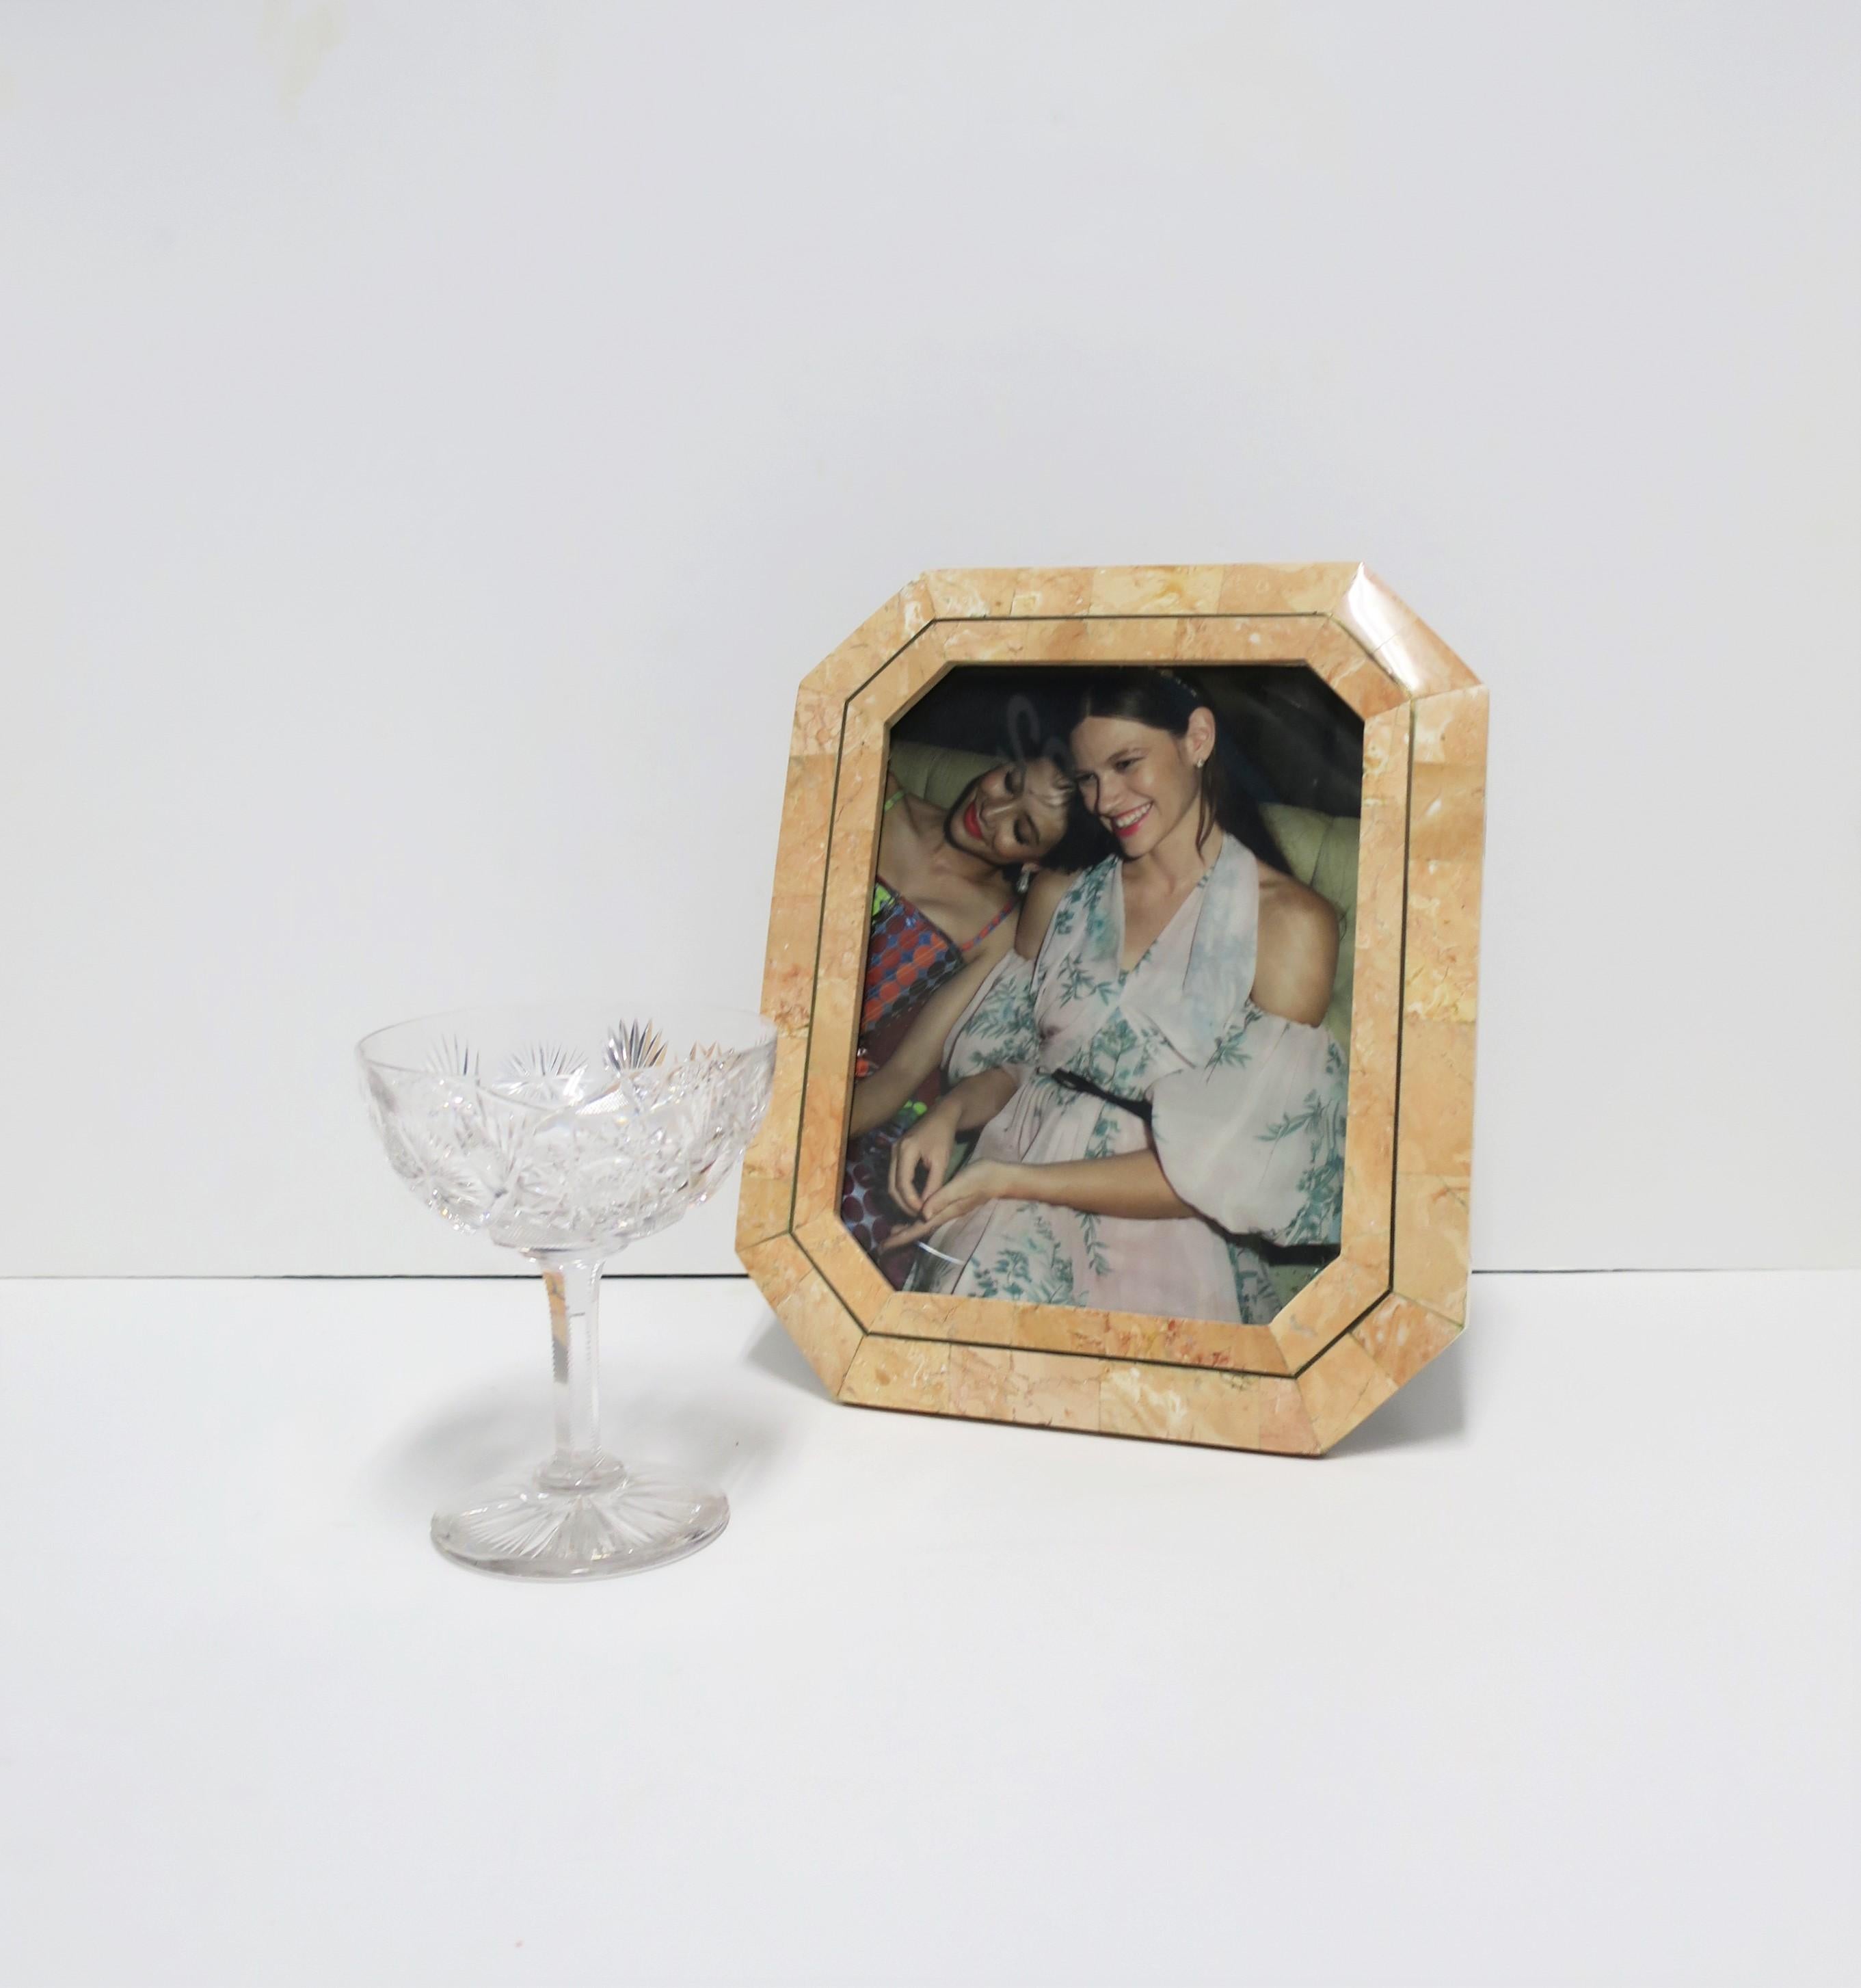 Philippine Marble and Brass Picture Frame by Designer Maitland Smith, ca. 1980s For Sale